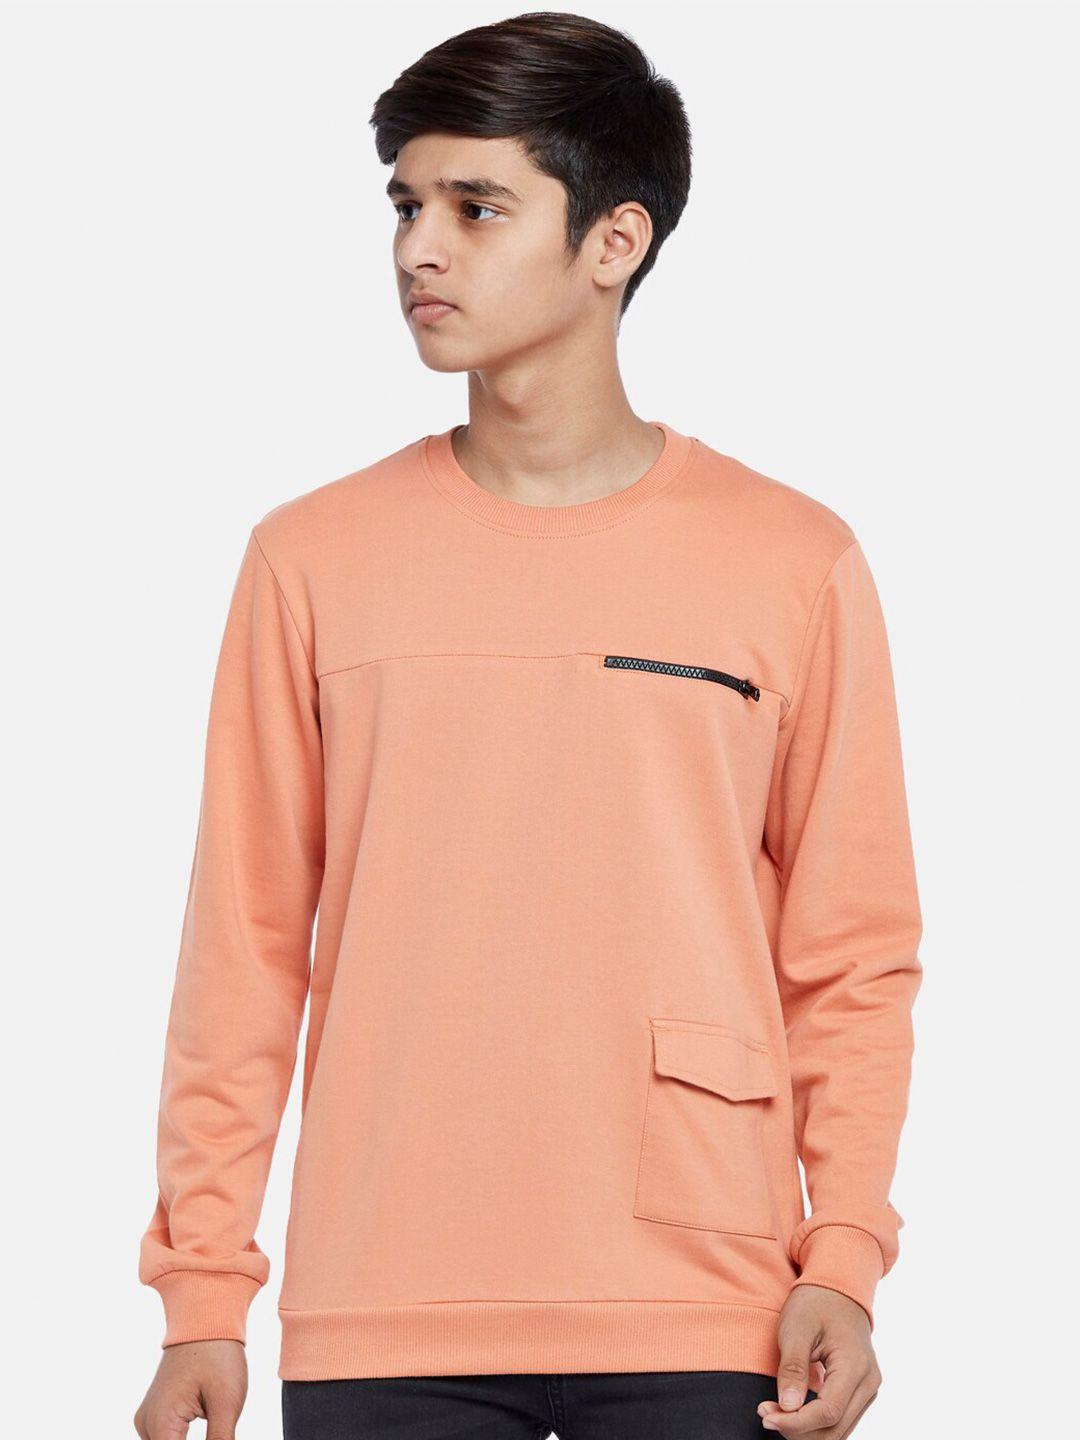 coolsters by pantaloons boys coral solid cotton sweatshirt